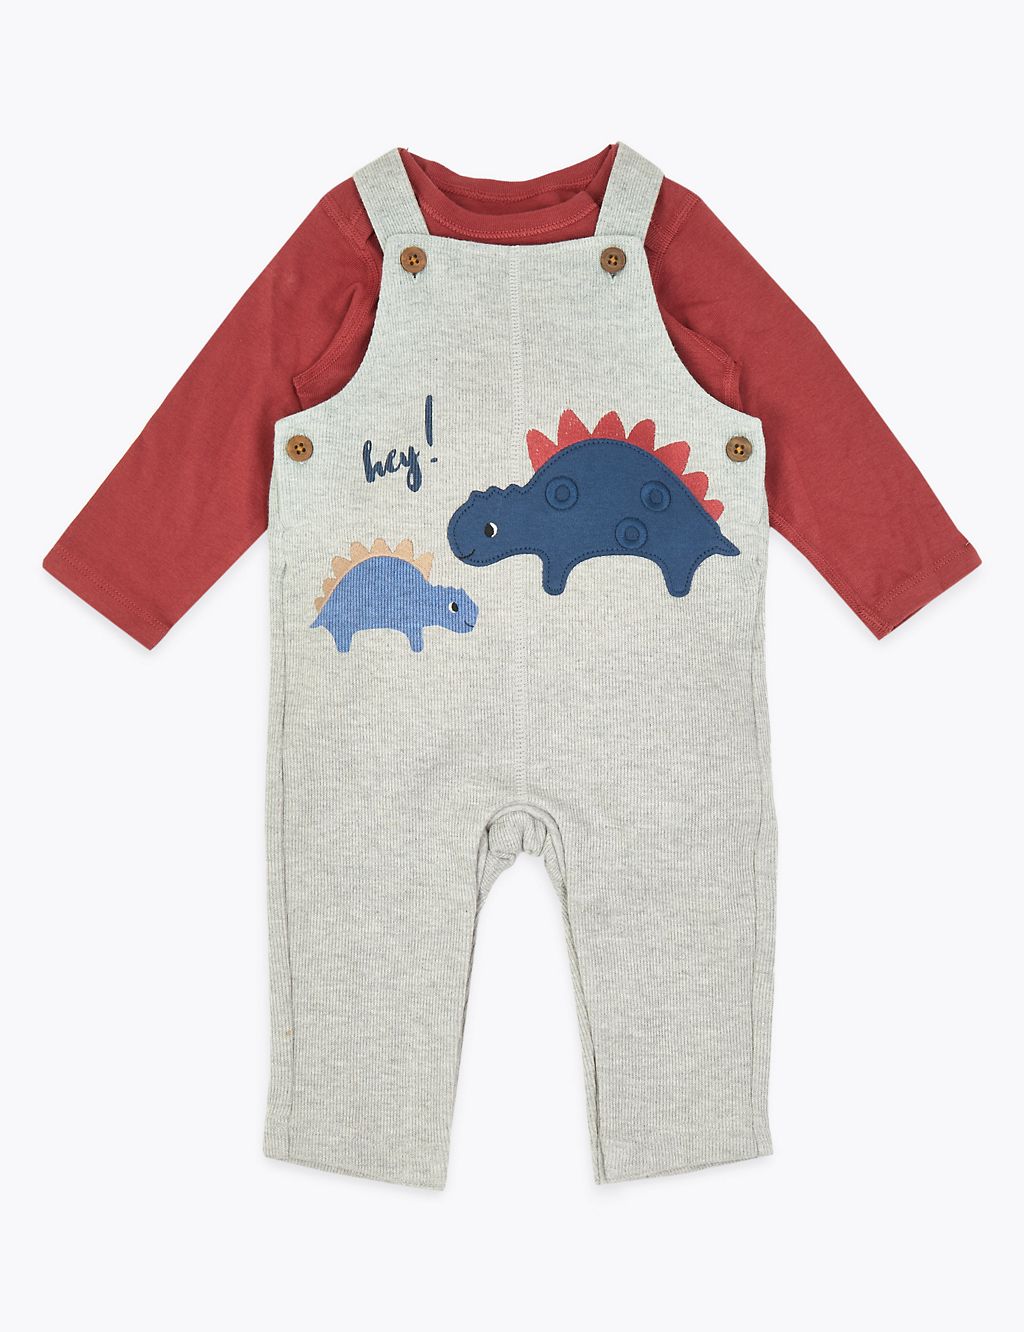 2 Piece Cotton Dinosaur Print Outfit 1 of 7